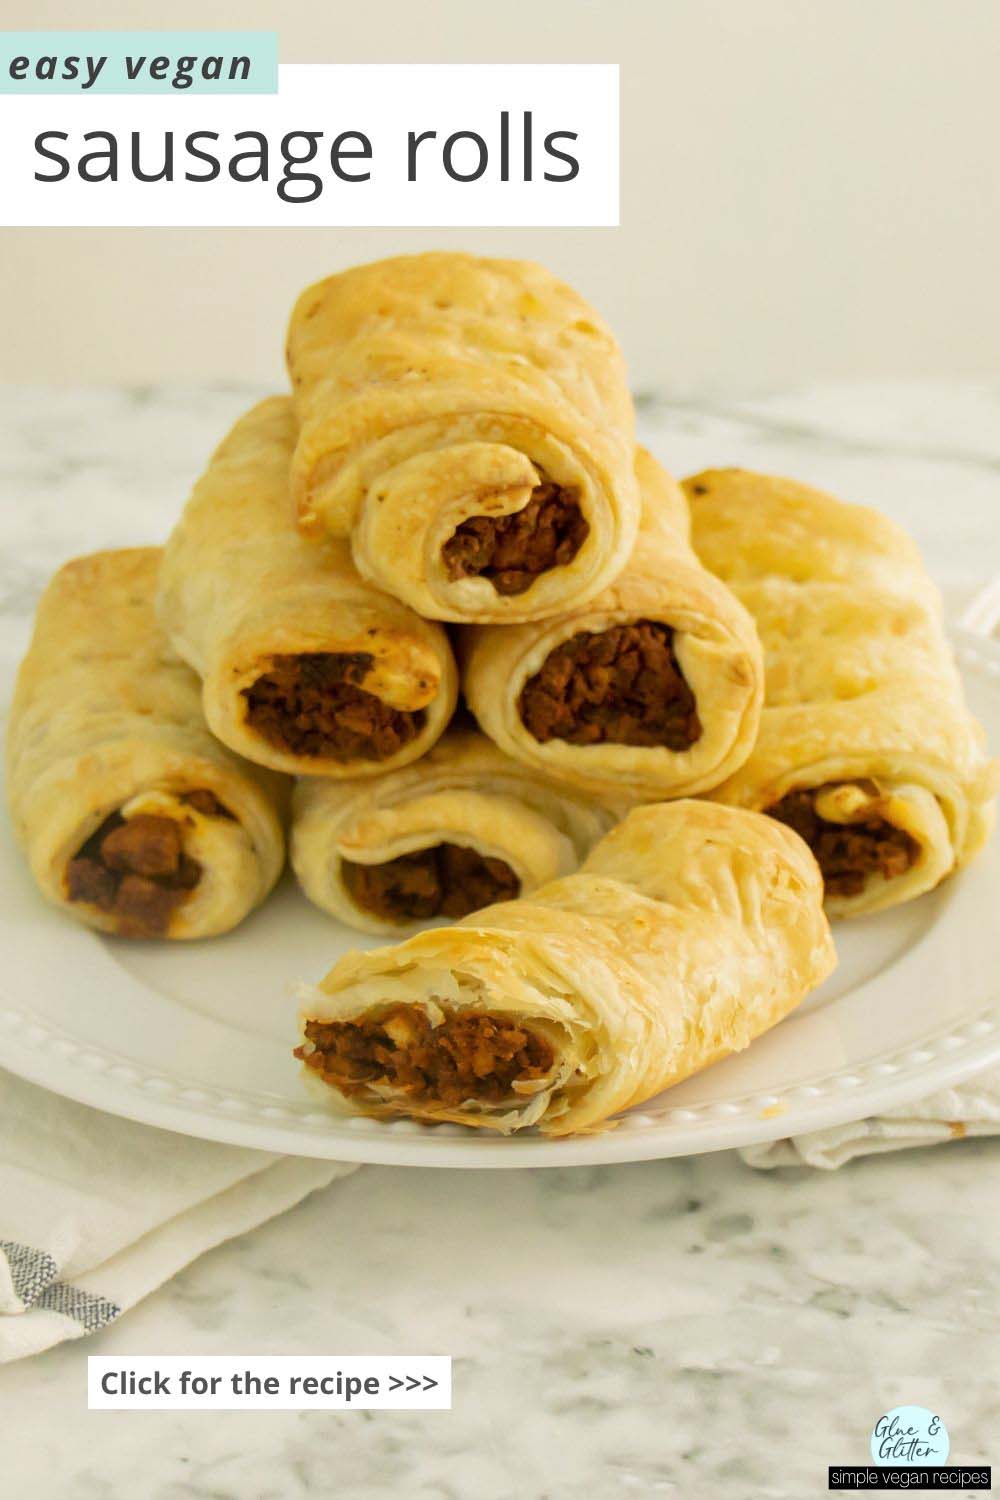 vegan sausage rolls on a white plate, text overlay